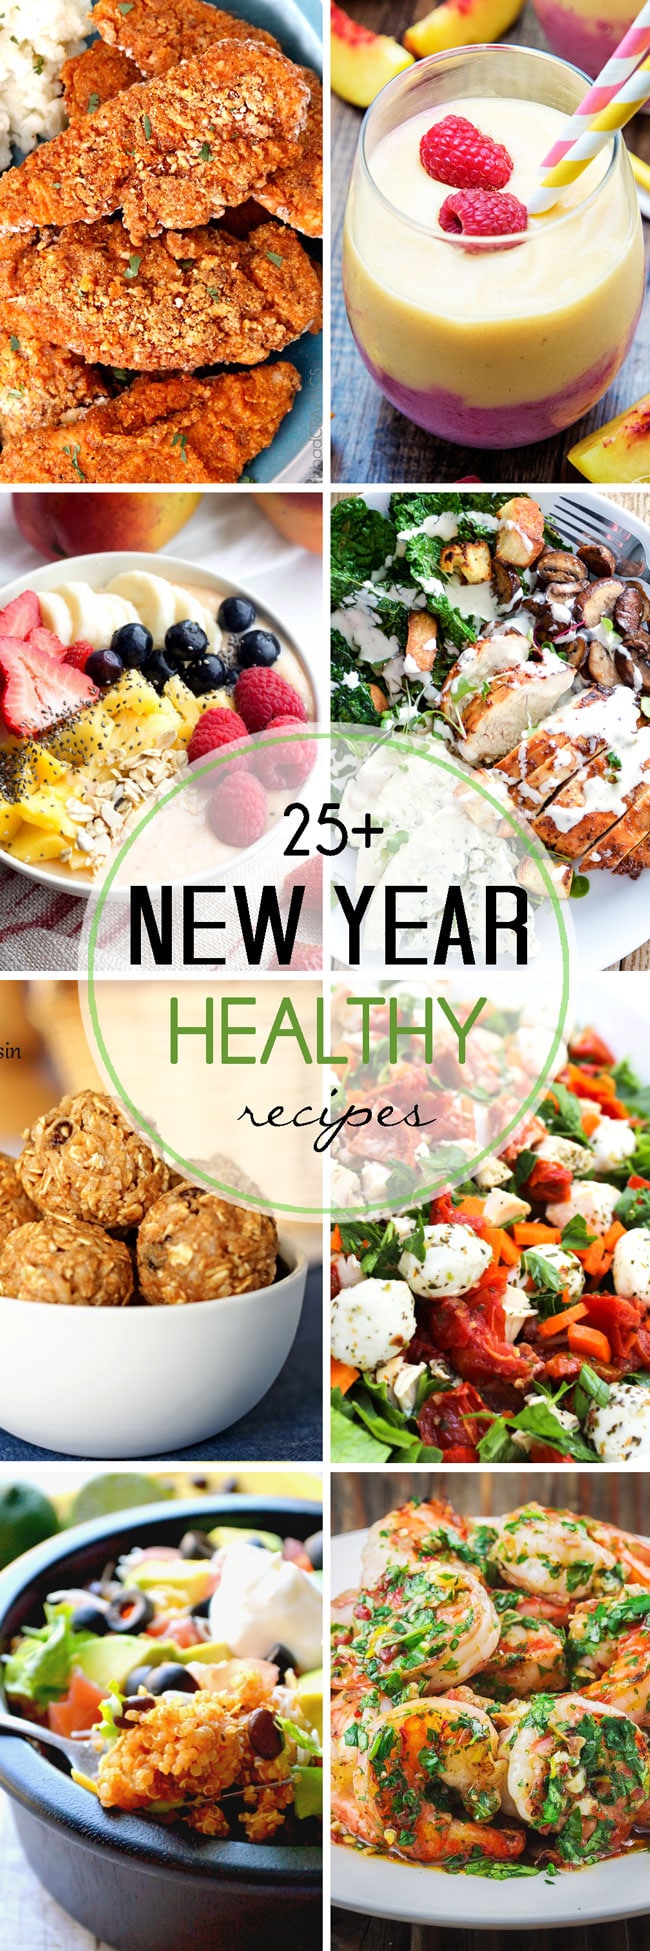 a collection of healthy recipes to kick of the new year